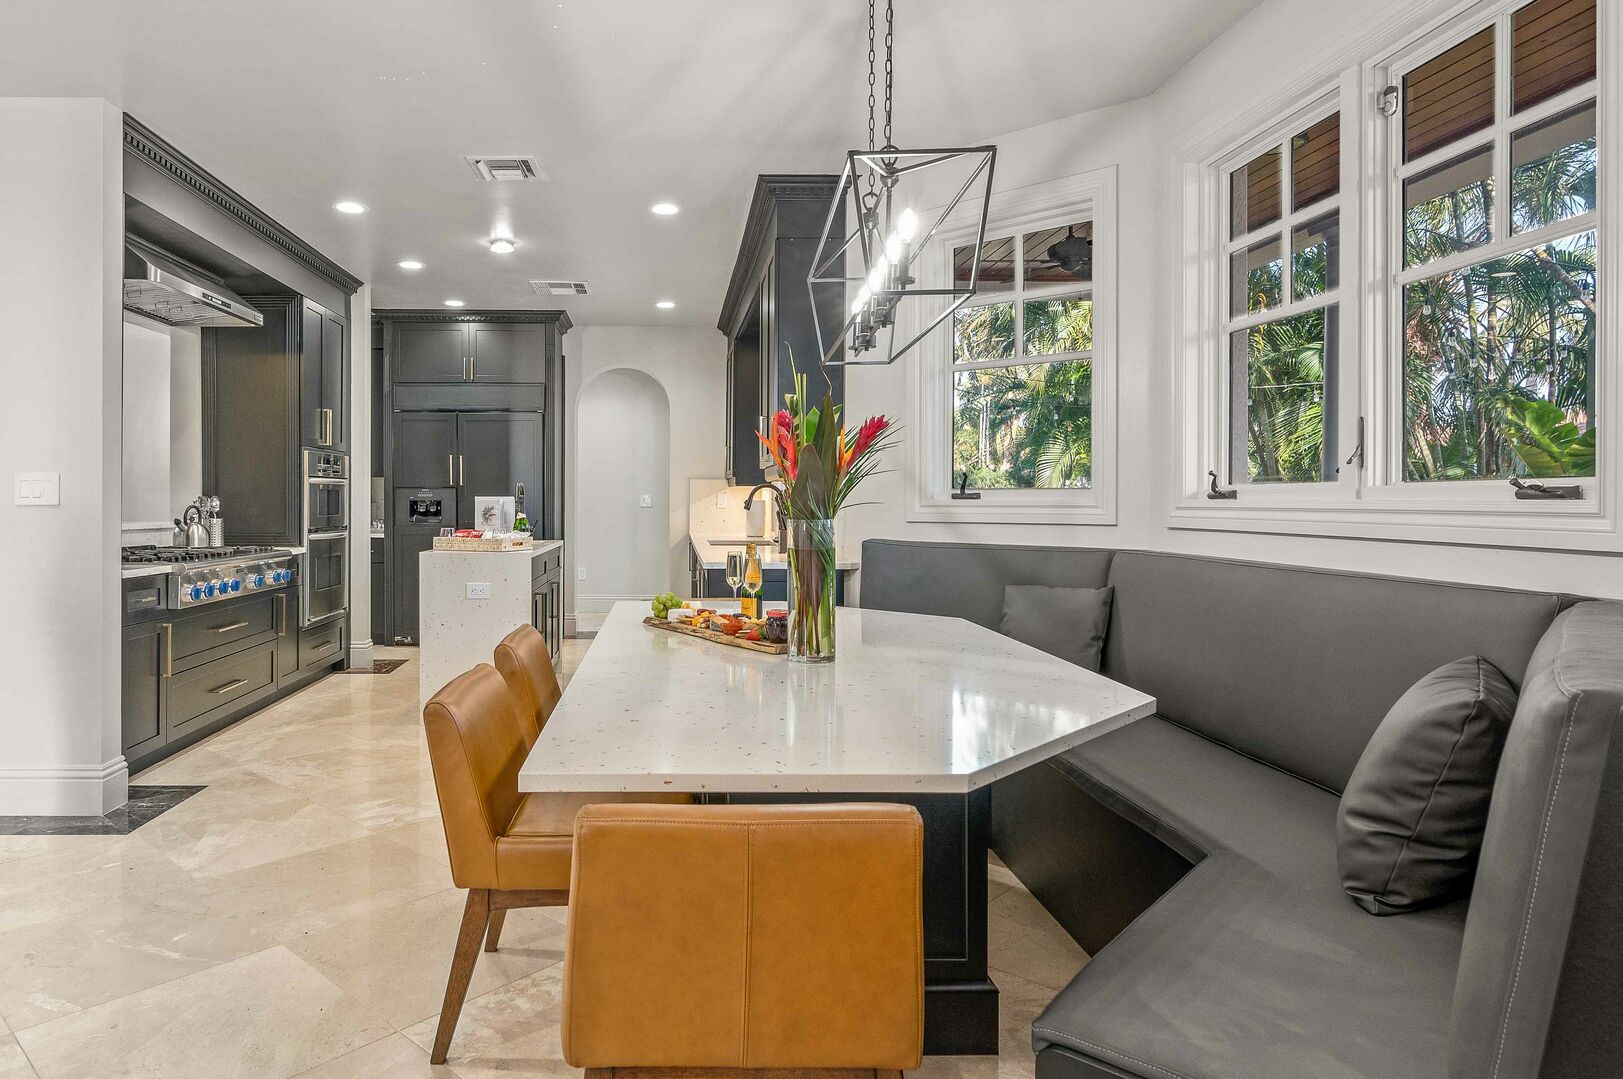 The breakfast nook is conveniently connected to the kitchen which seats eight.